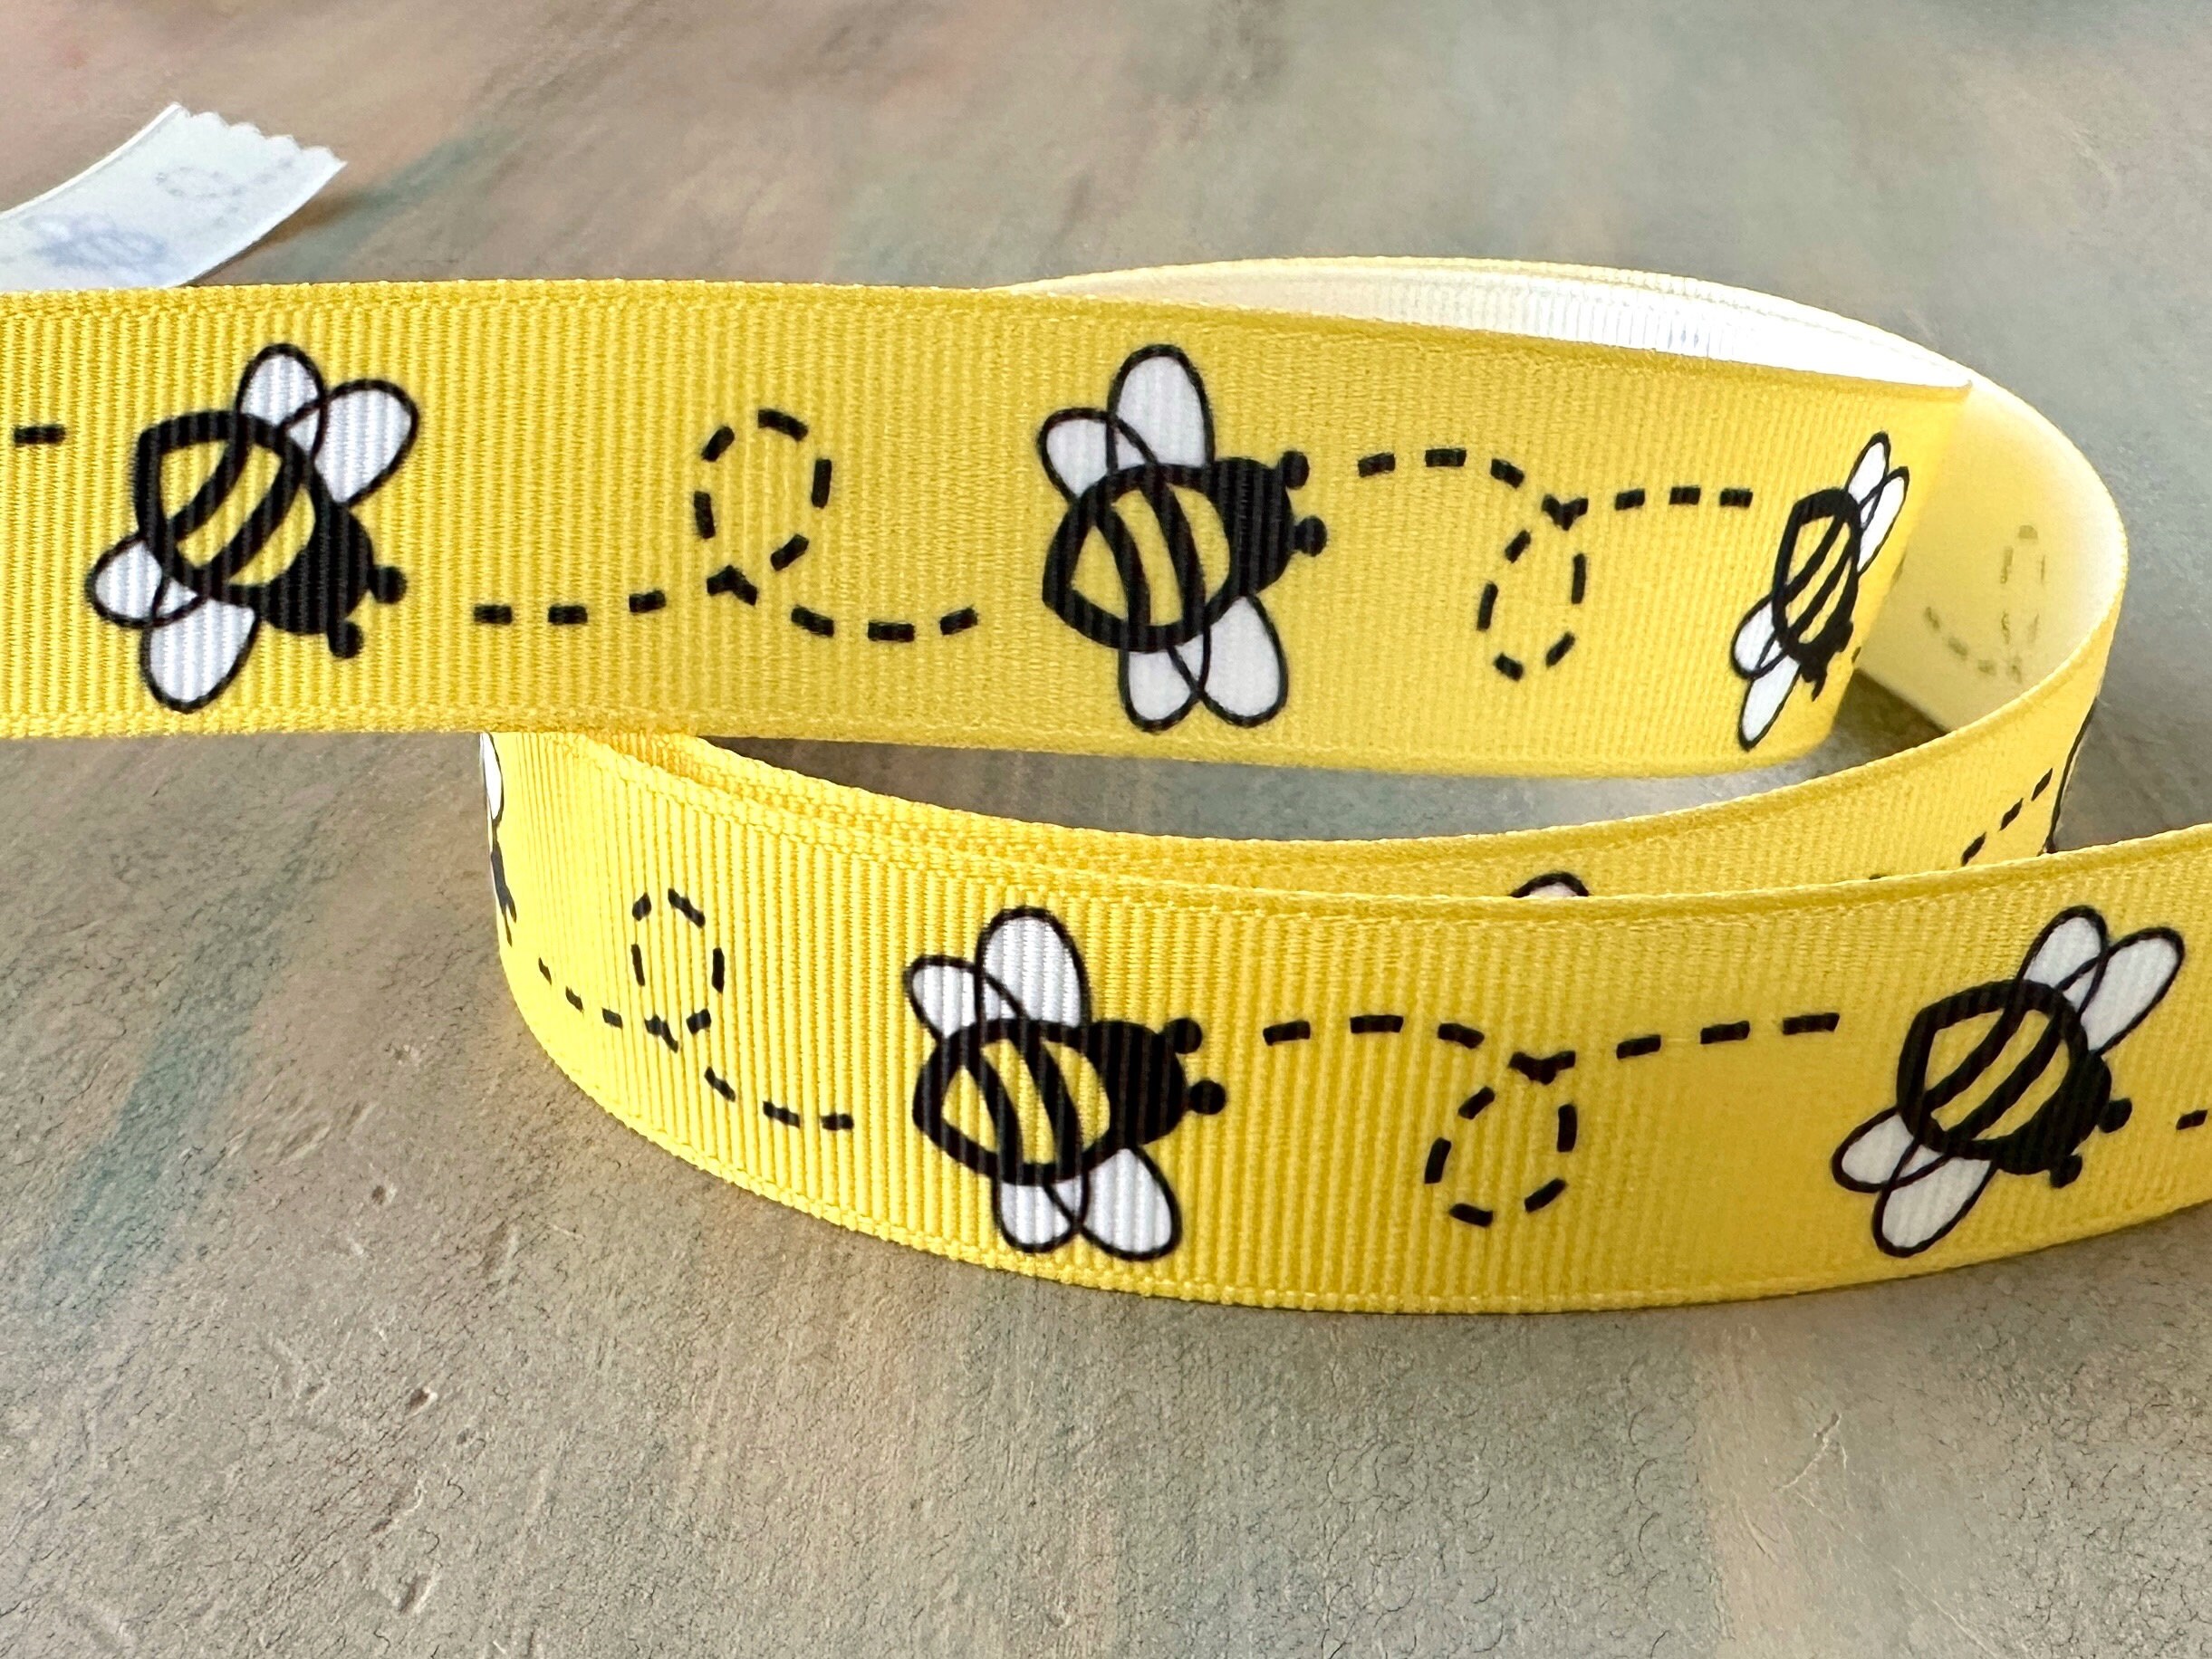 Buzzing Bees Ribbon with a yellow comb printed on 1.5 grosgrain